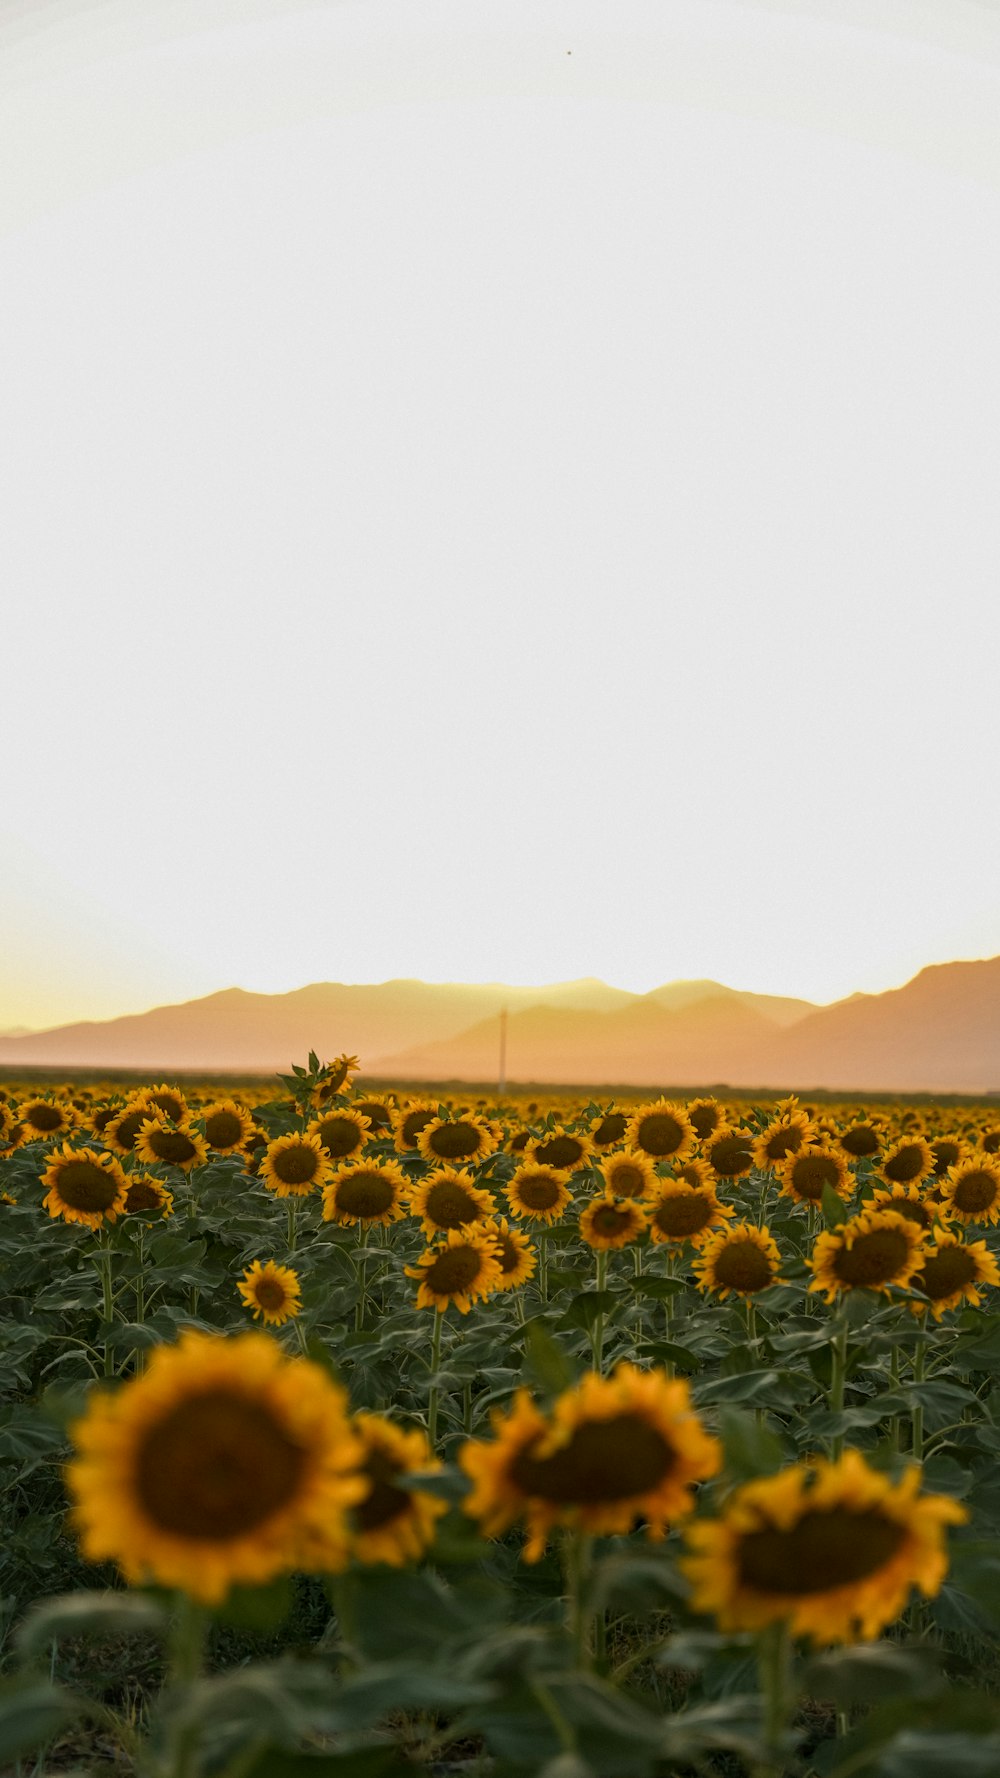 a large field of sunflowers with mountains in the background